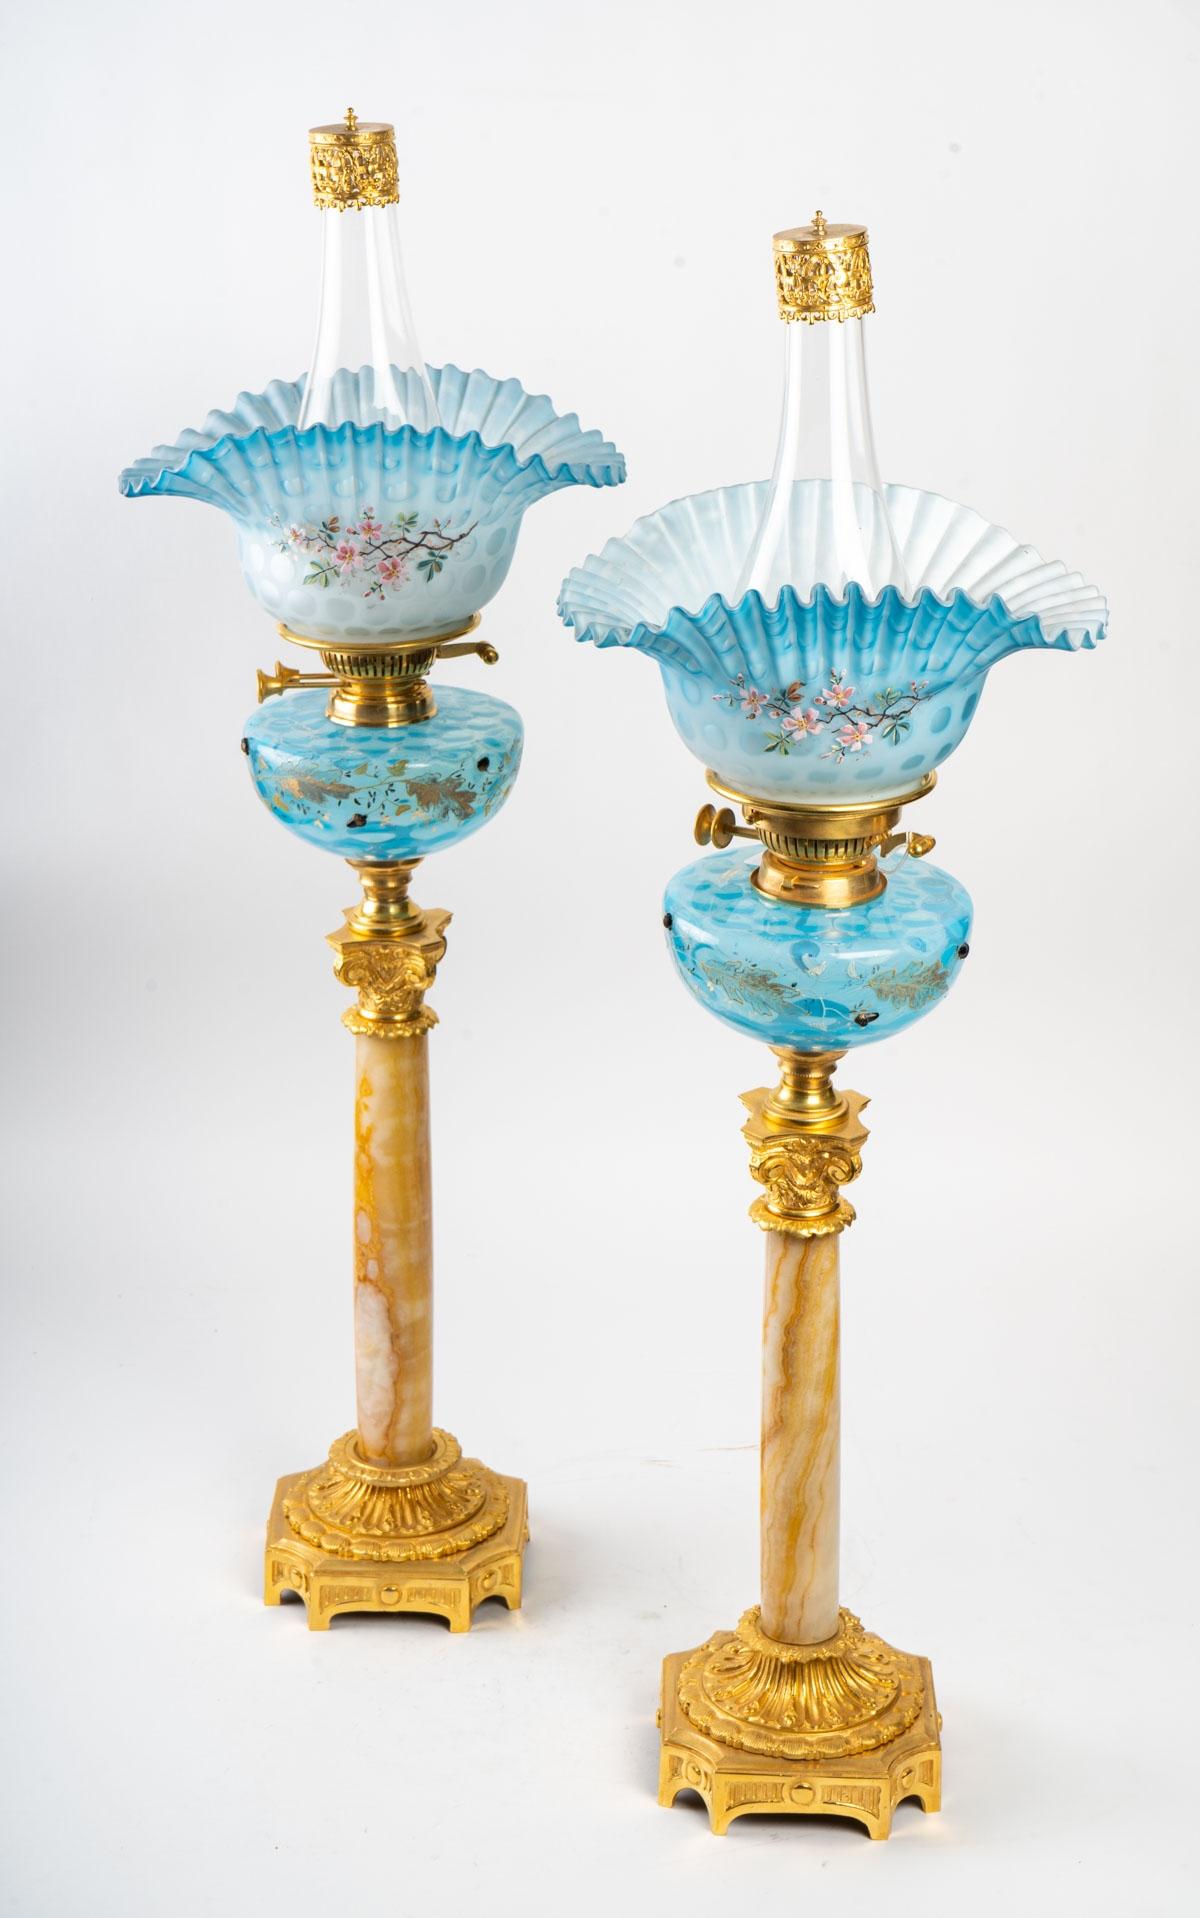 Pair of oil lamps with onyx column and bronze frame.
Translucent blue translucent Opaline glass tank with gold oak leaf decoration.
Measures: H 87cm, W 30cm, D 20cm.